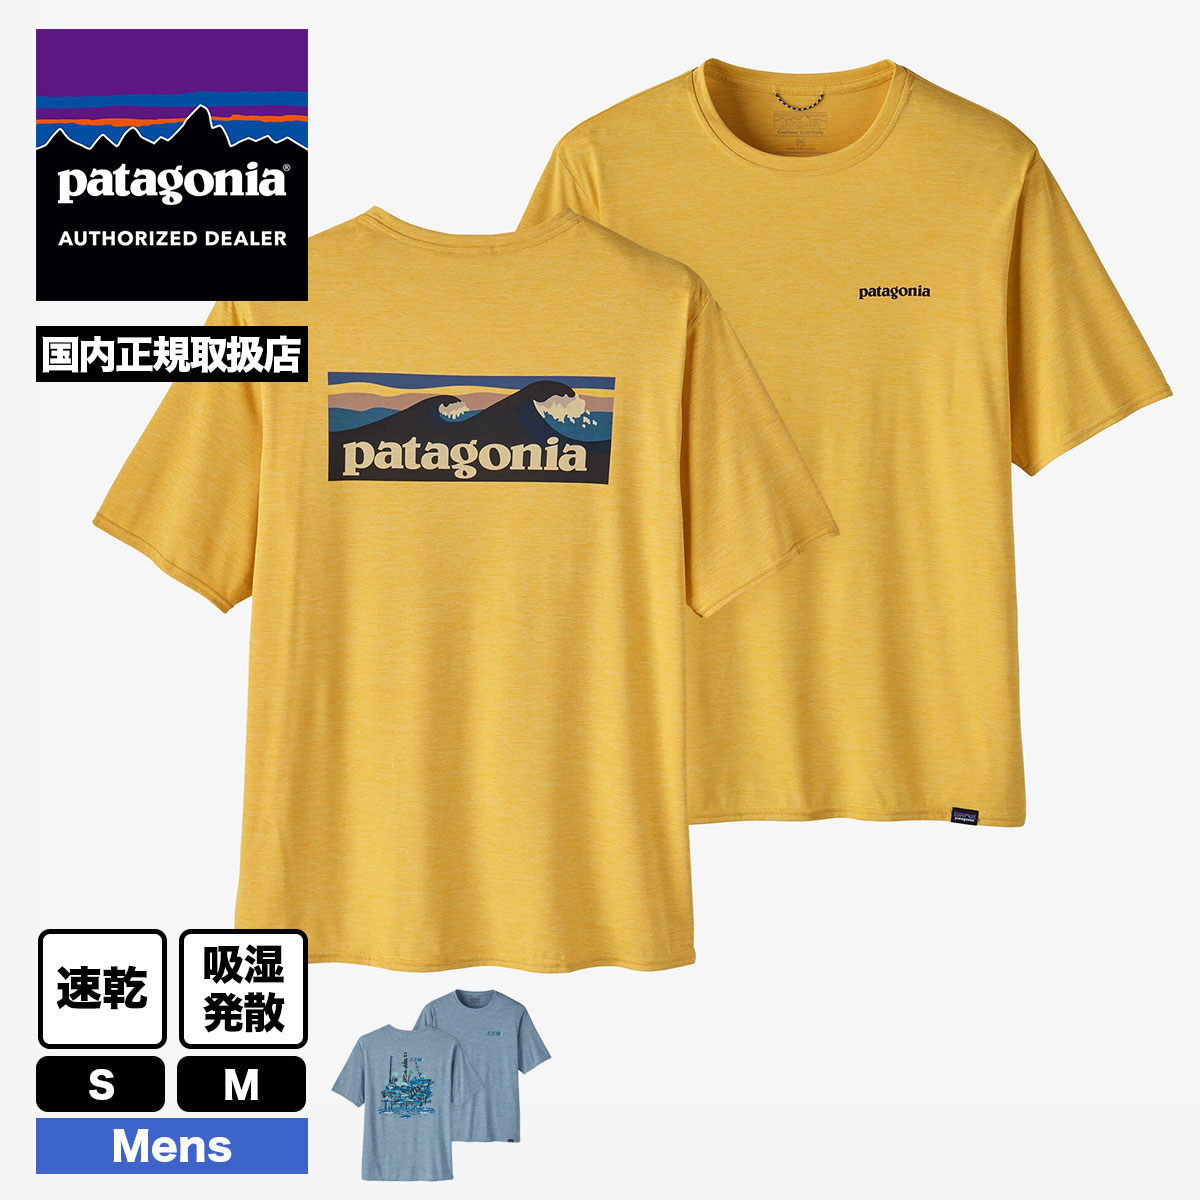 NEW限定品】 PATAGONIA パタゴニア キャプリーン クール デイリー グラフィック シャツ CAPILENE COOL DAILY  GRAPHIC SHIRT -WATERS STPX 45355